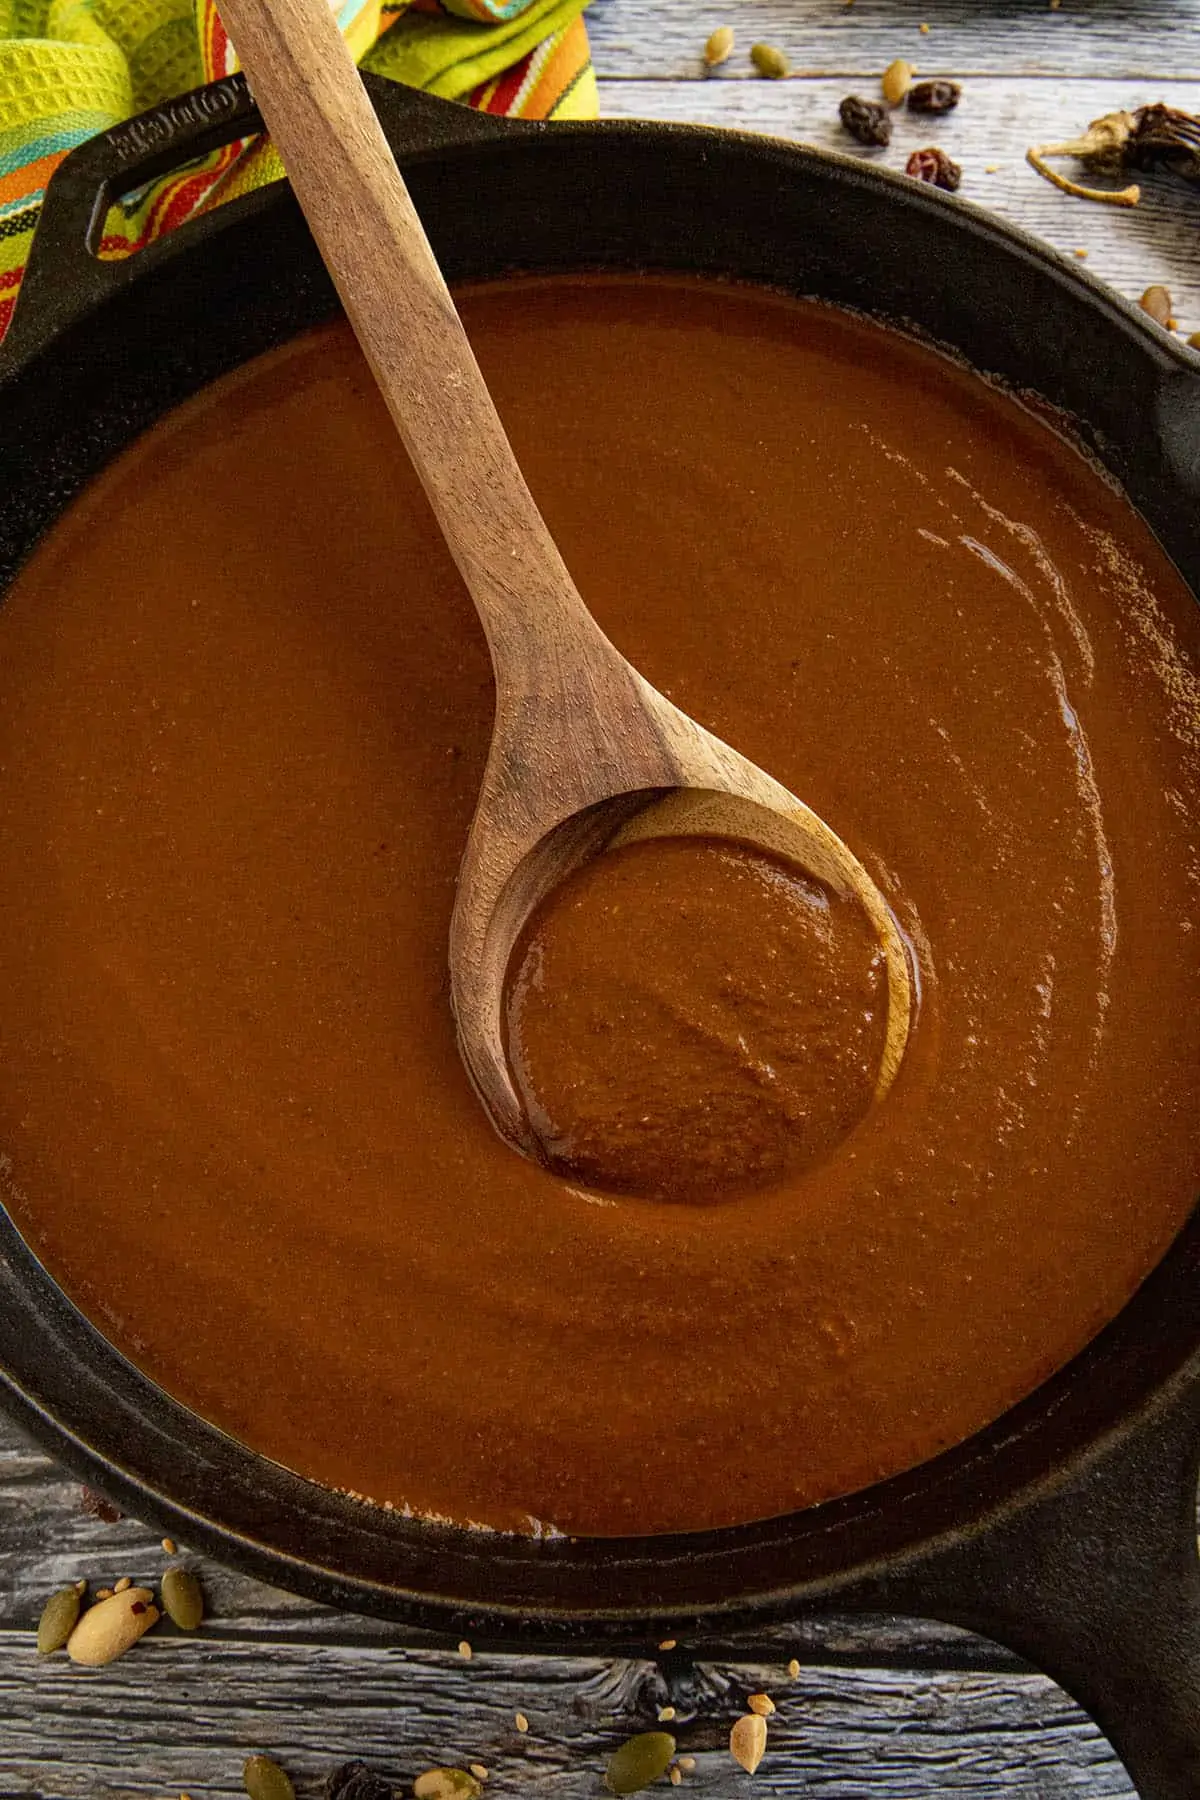 Serving Mole Poblano sauce from the pan